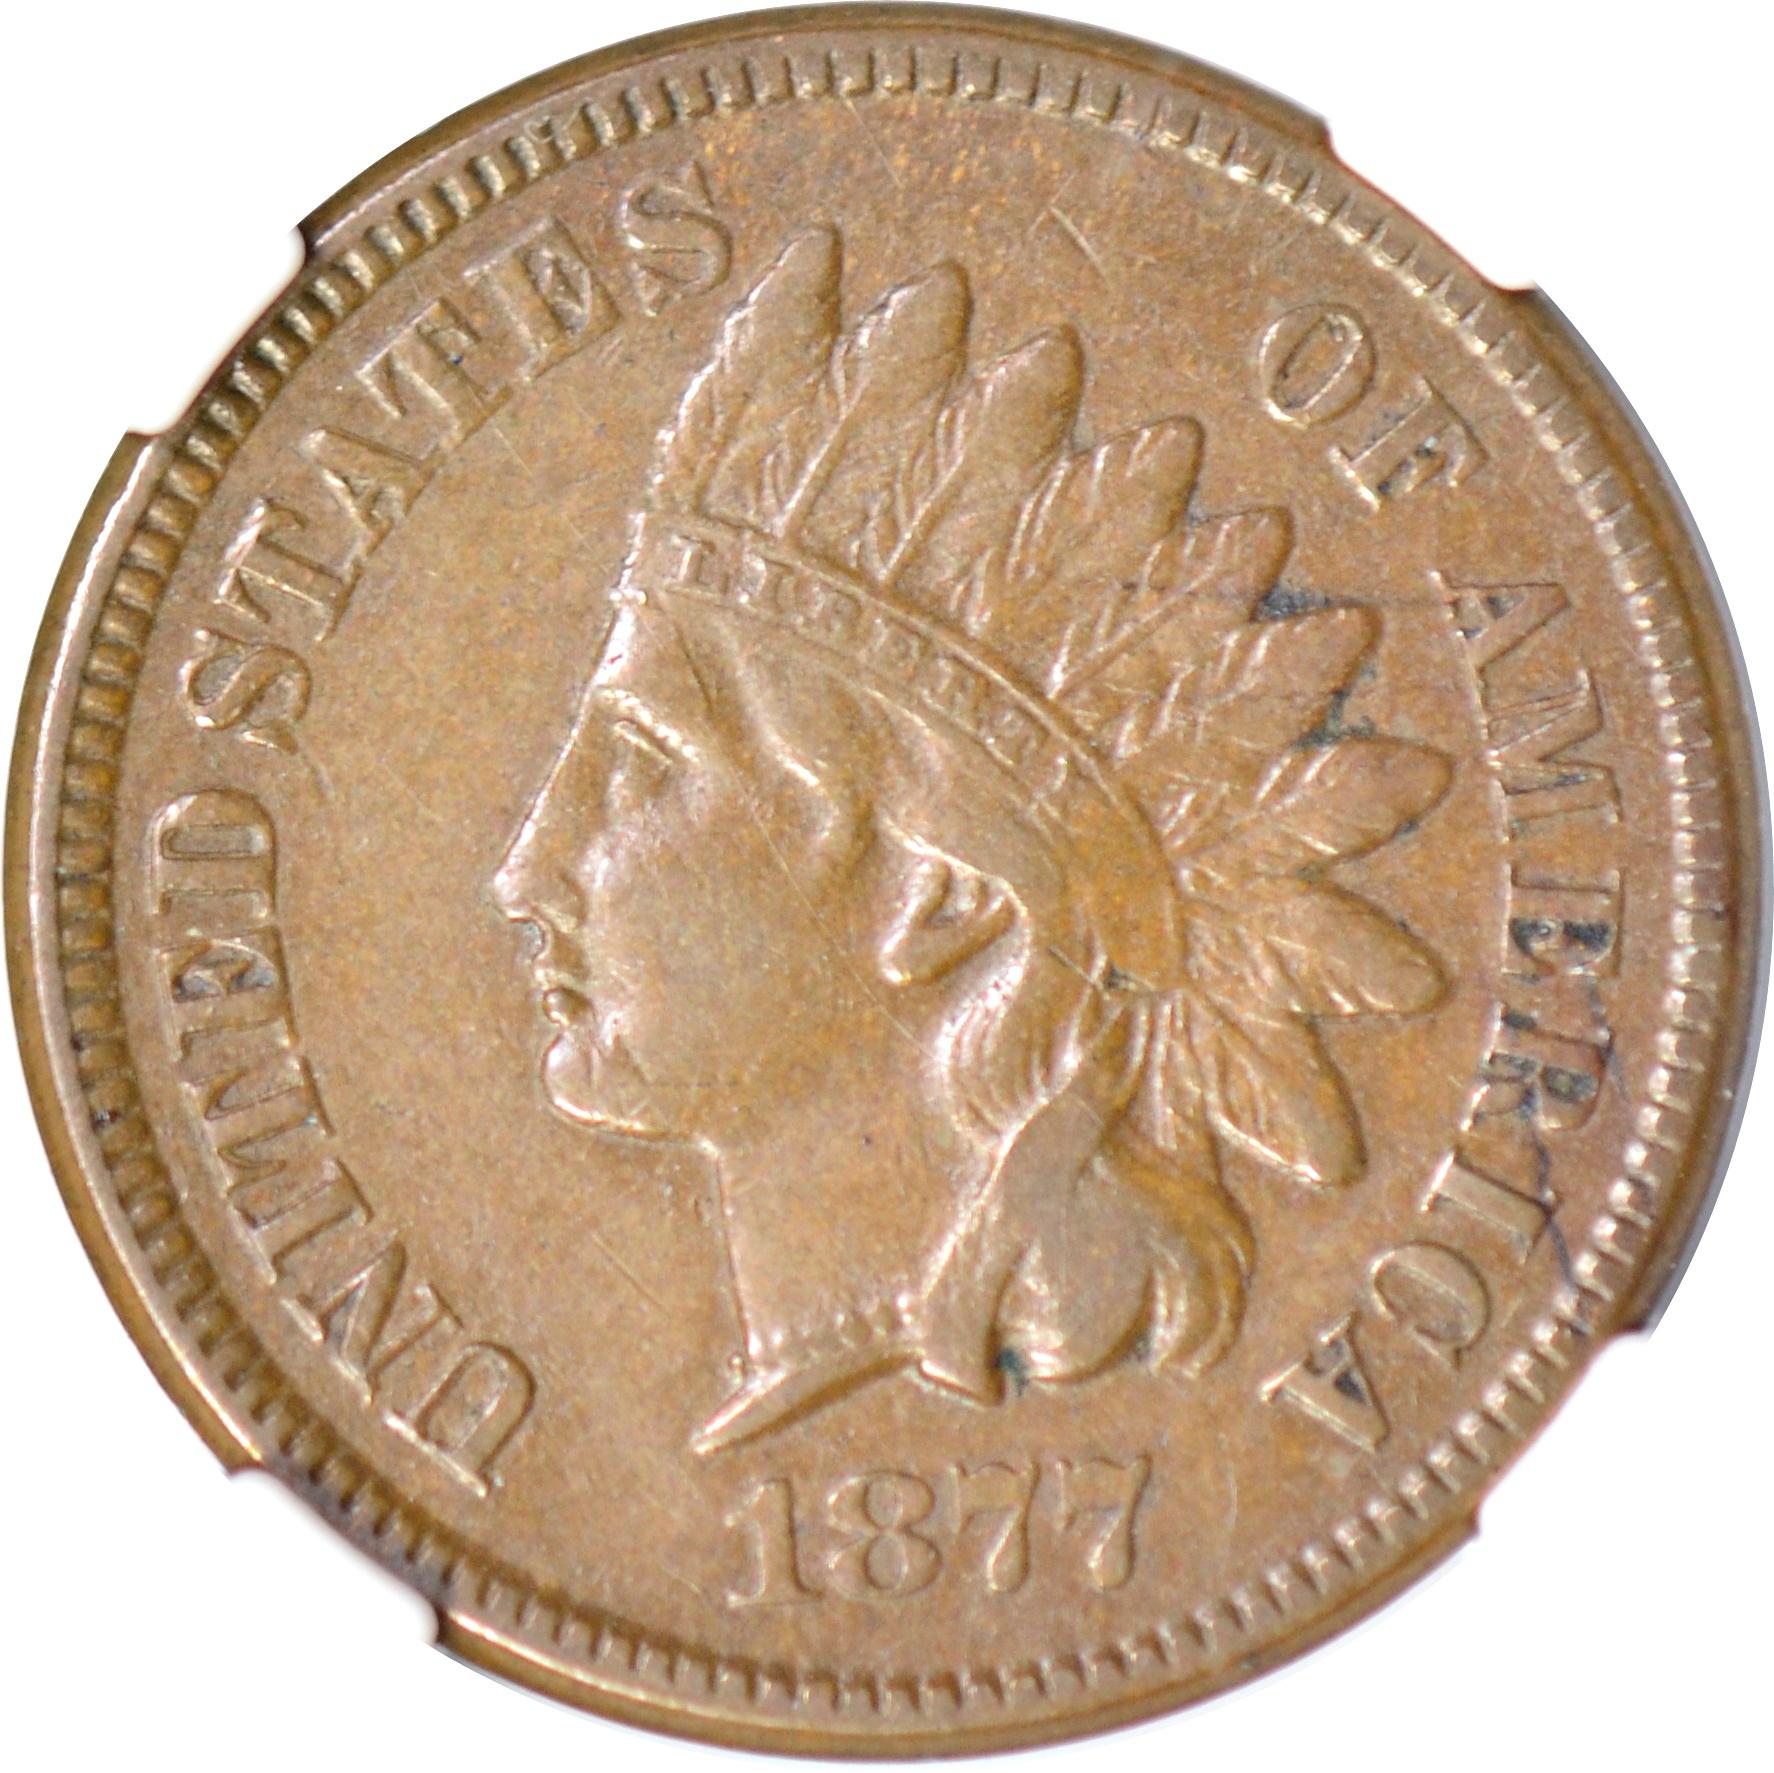 1877 INDIAN HEAD CENT - NGC XF45